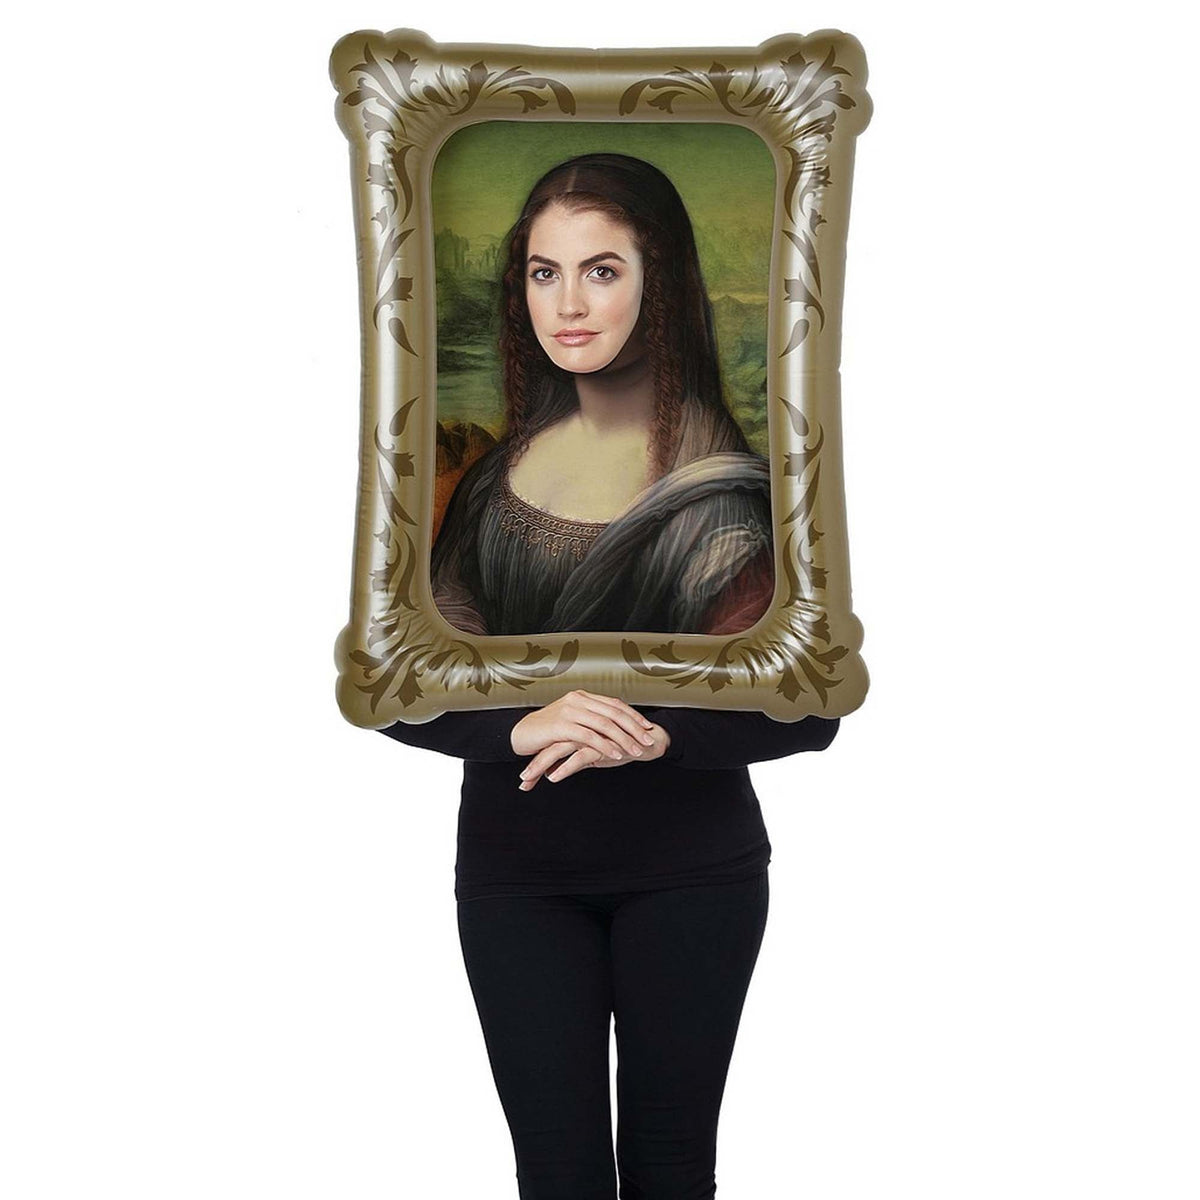 CALIFORNIA COSTUMES Costume Accessories Mona Lisa Costume Kit for Adults